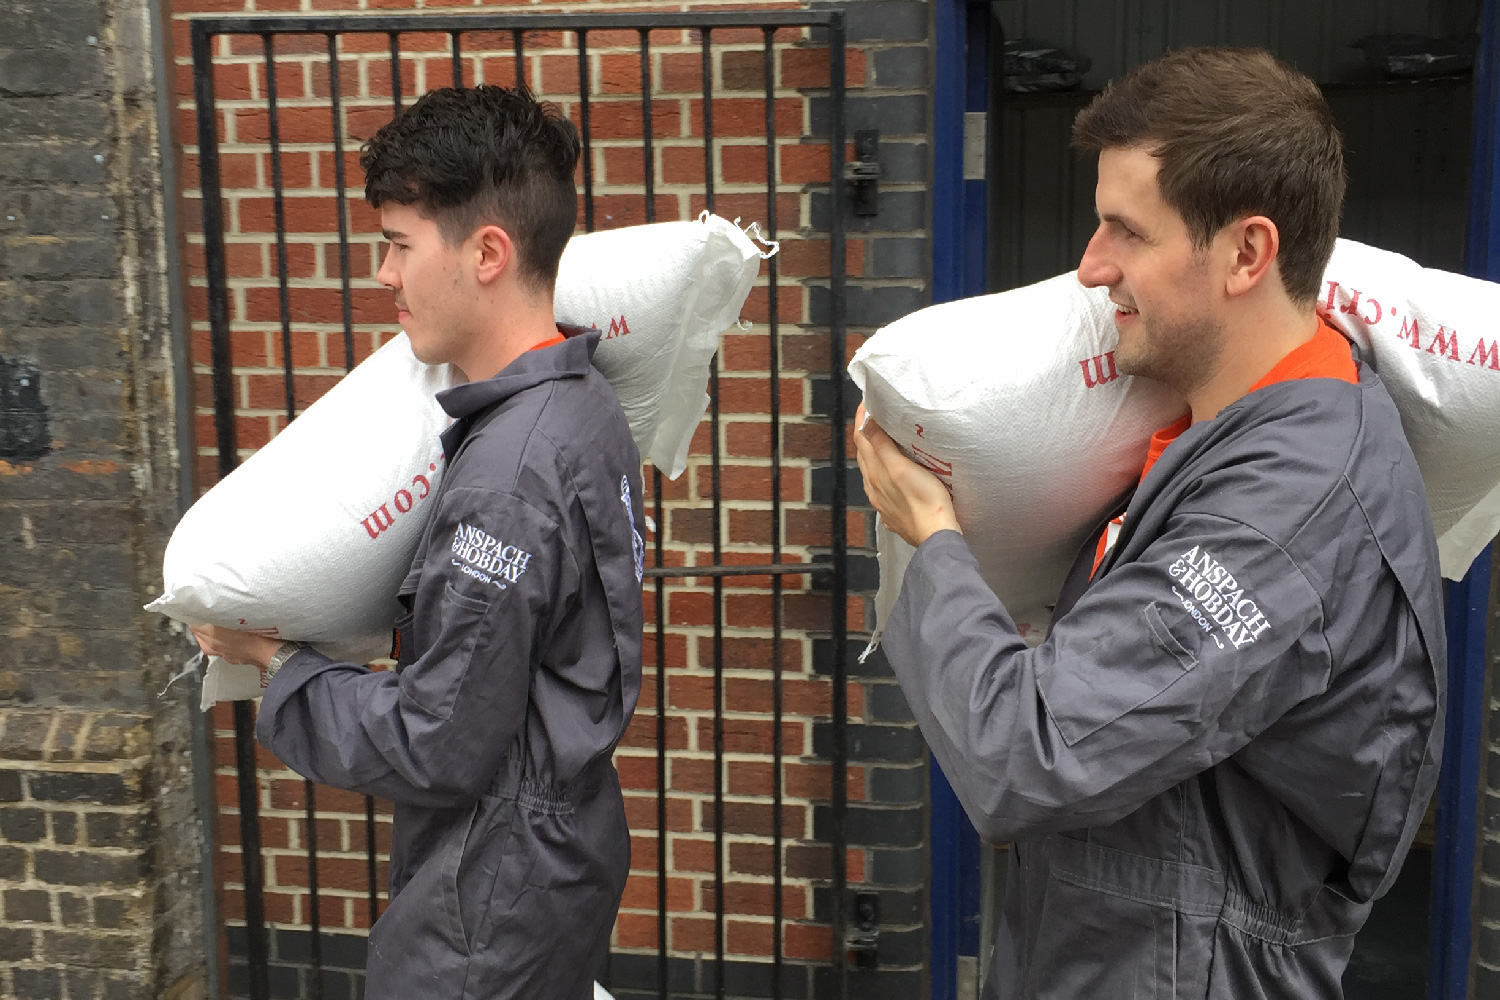 Two men in grey jumpsuits carrying sacks of grain against a brick wall background